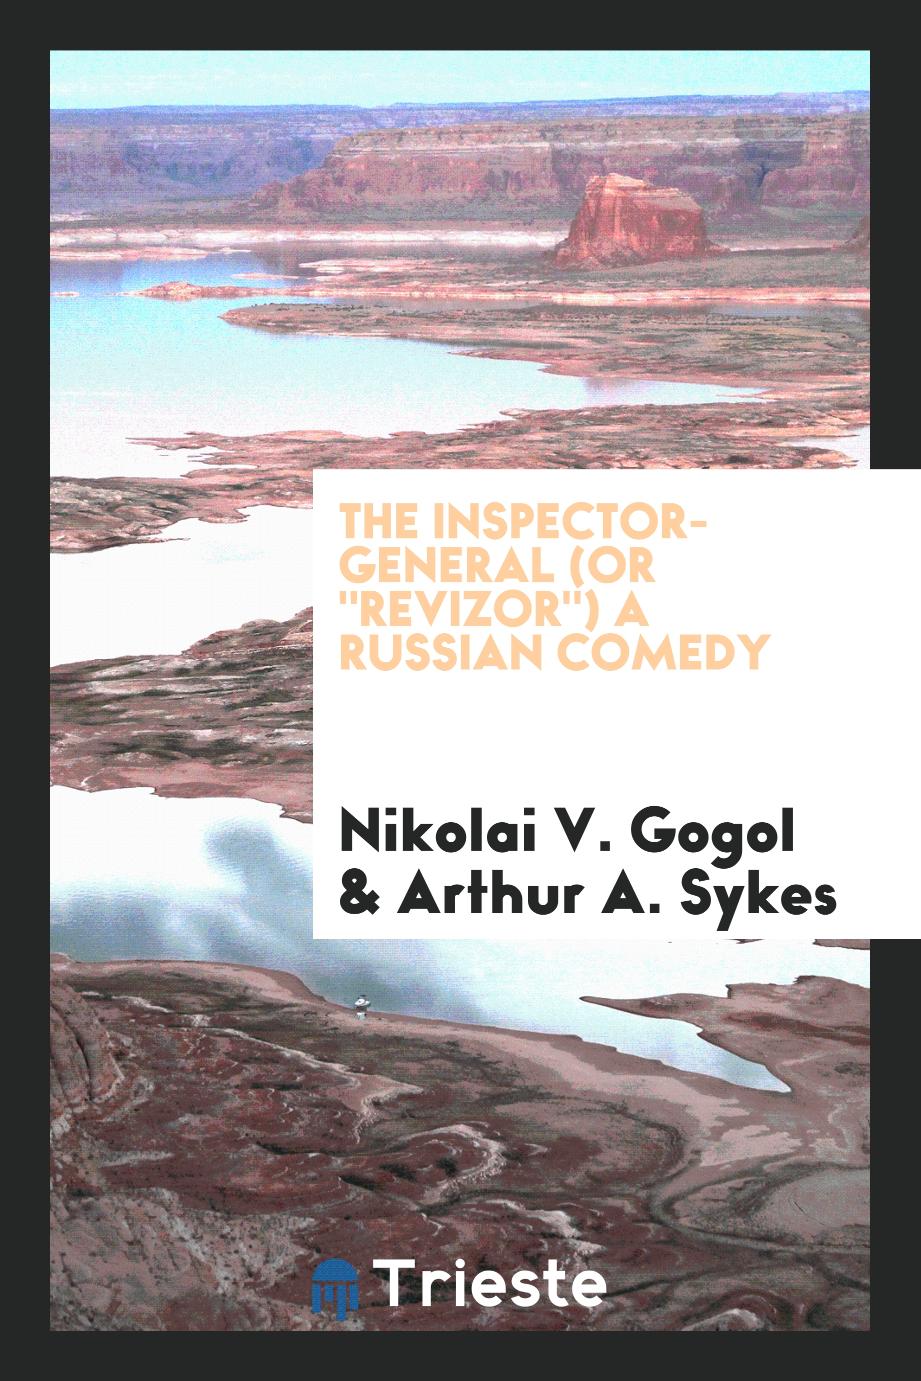 The inspector-general (or "Revizor") A Russian comedy